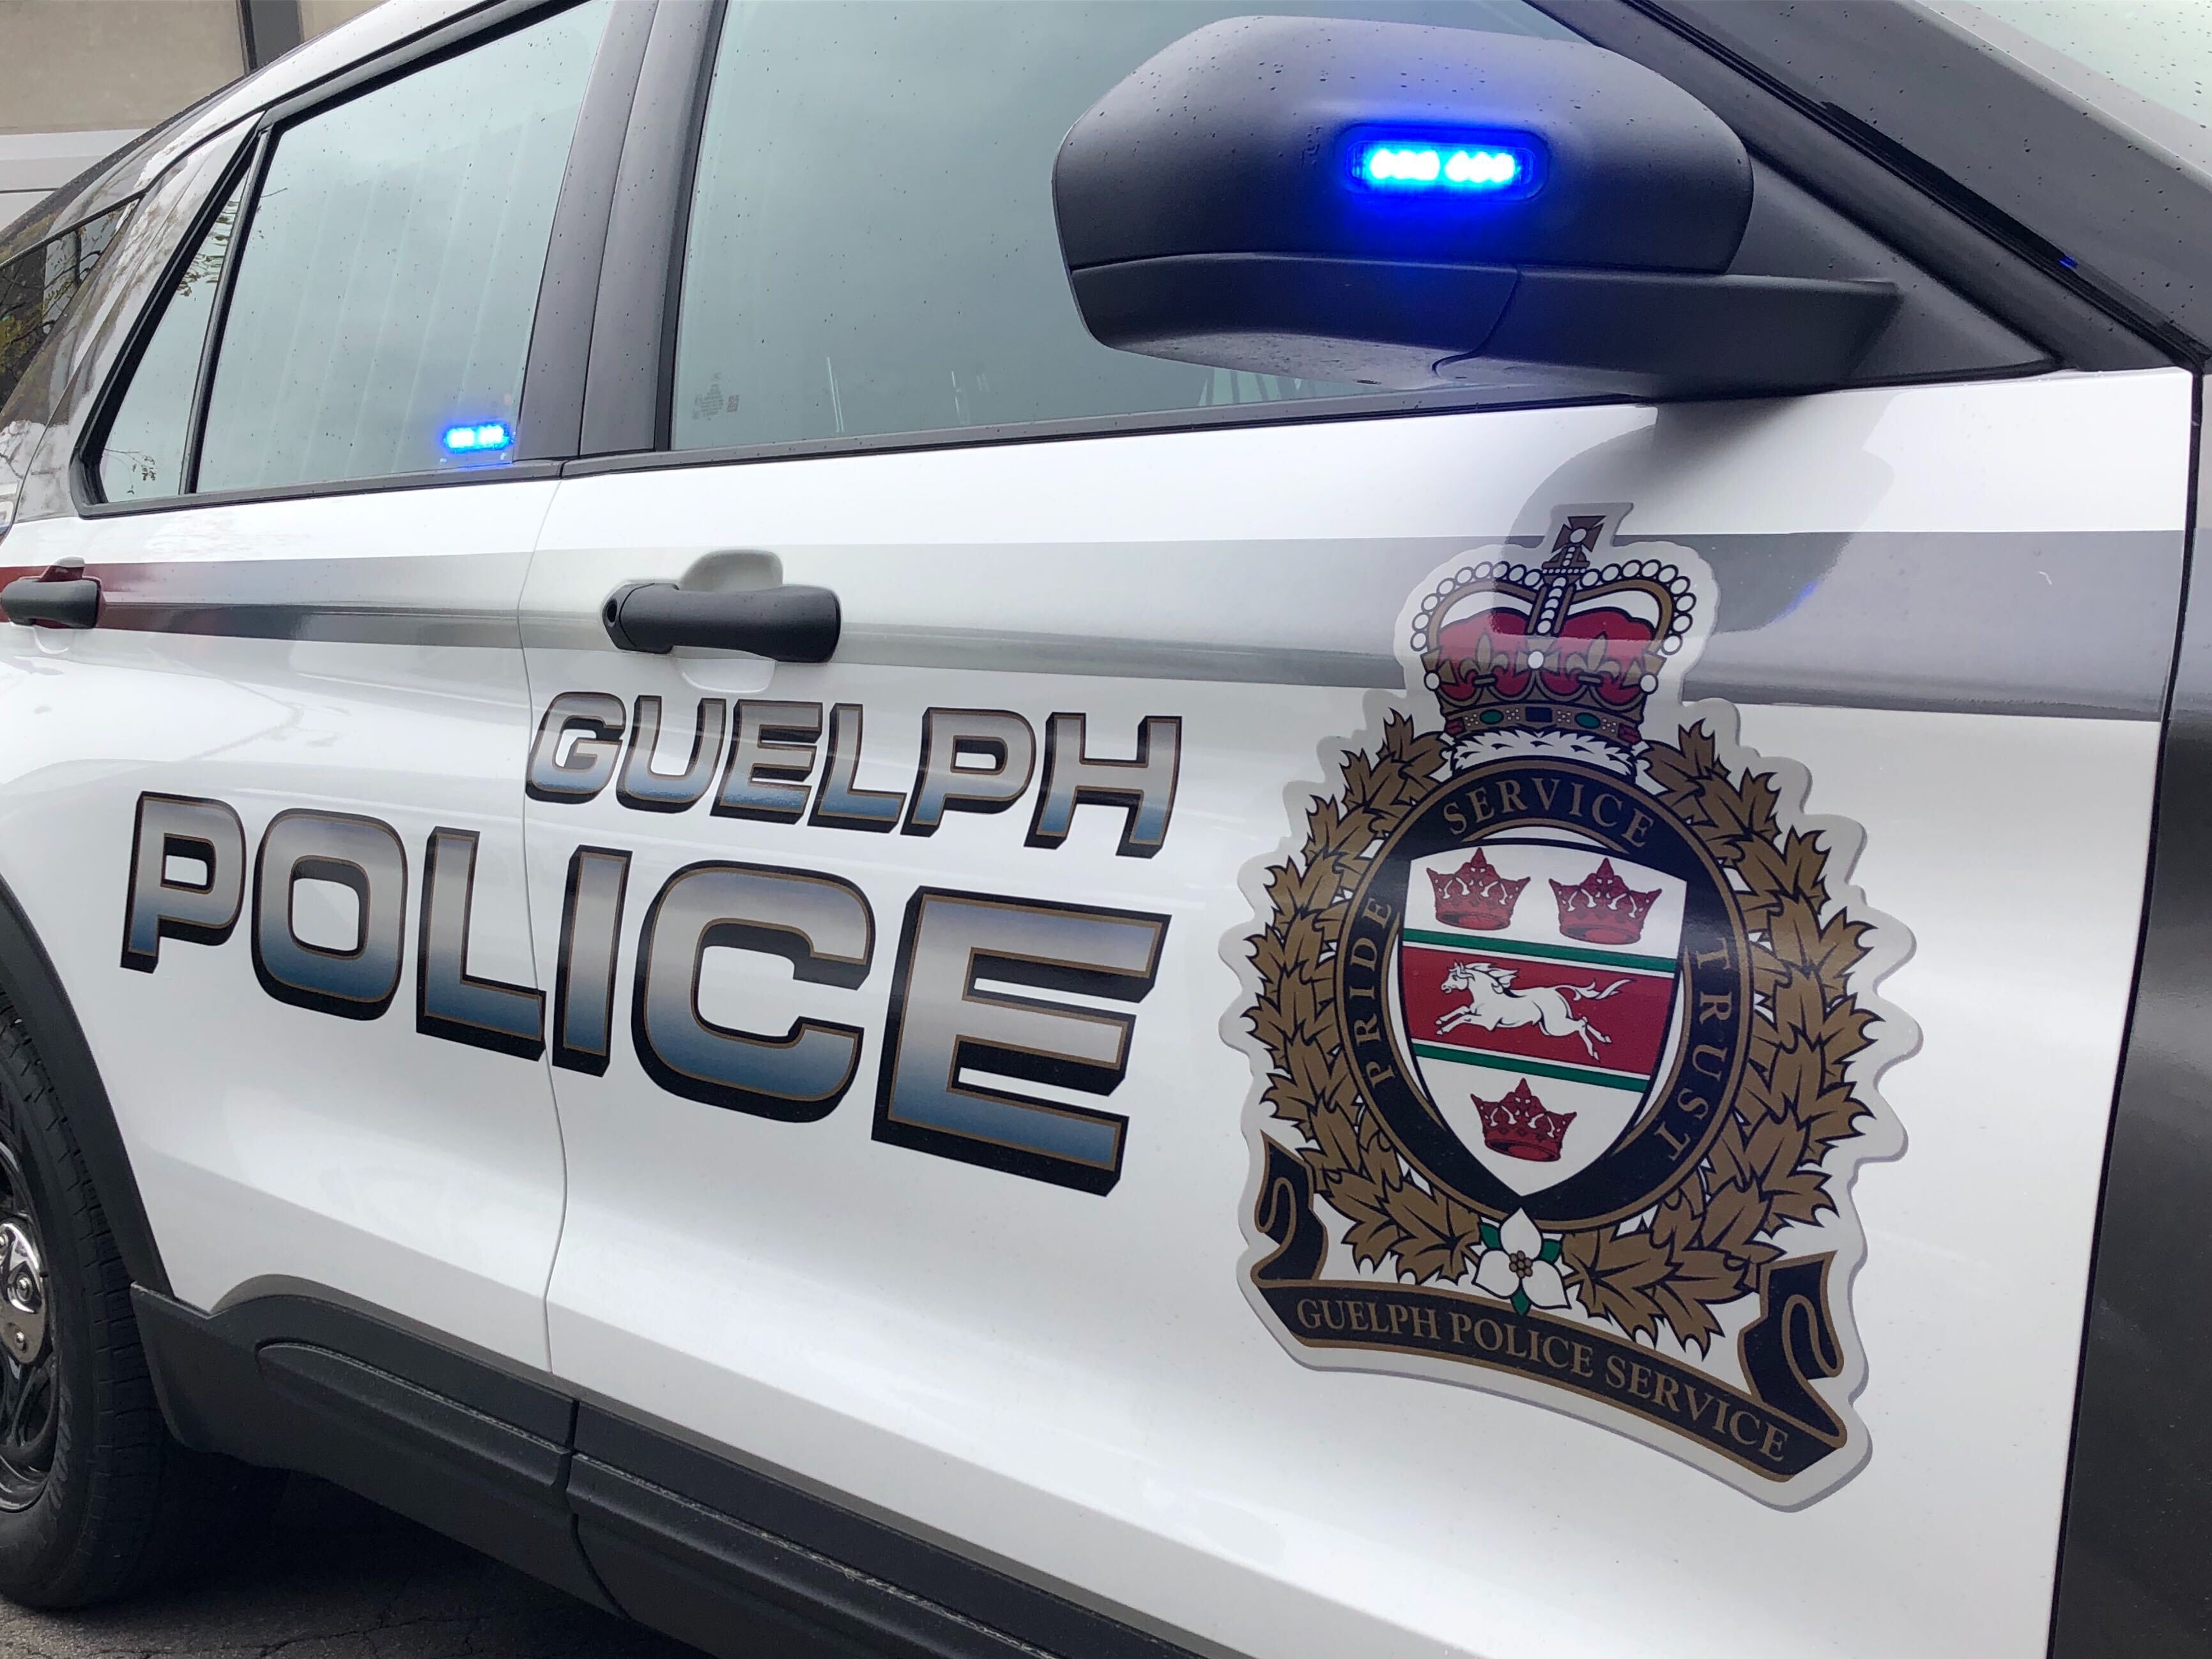 Guelph police recover stolen property from storage units